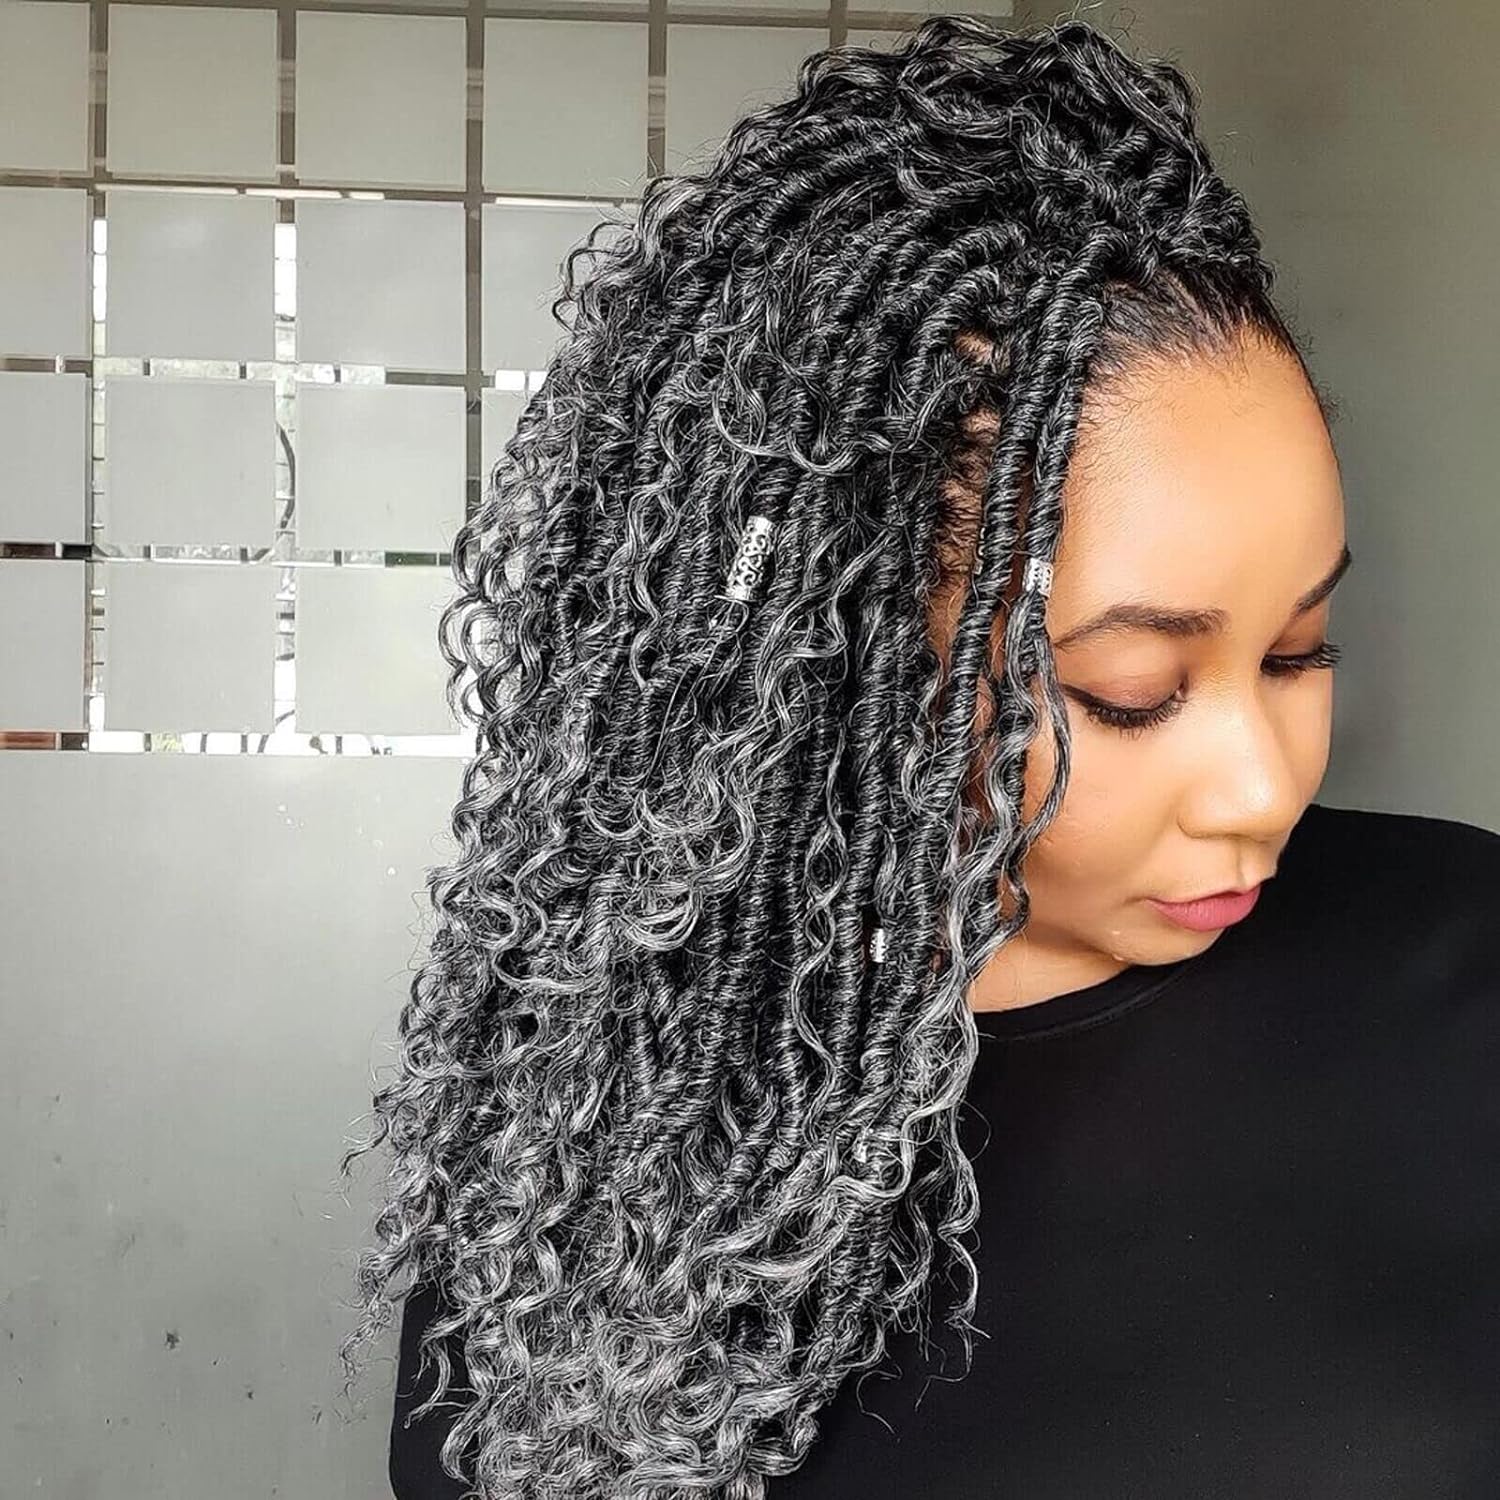 FAST SHIPPING 3-5 DAY GL | ToyoTress Curly Locs Crochet Hair - Natural Black Pre-twisted Faux Locs Crochet Braids, Short Pre-looped Synthetic Braiding Hair Extensions